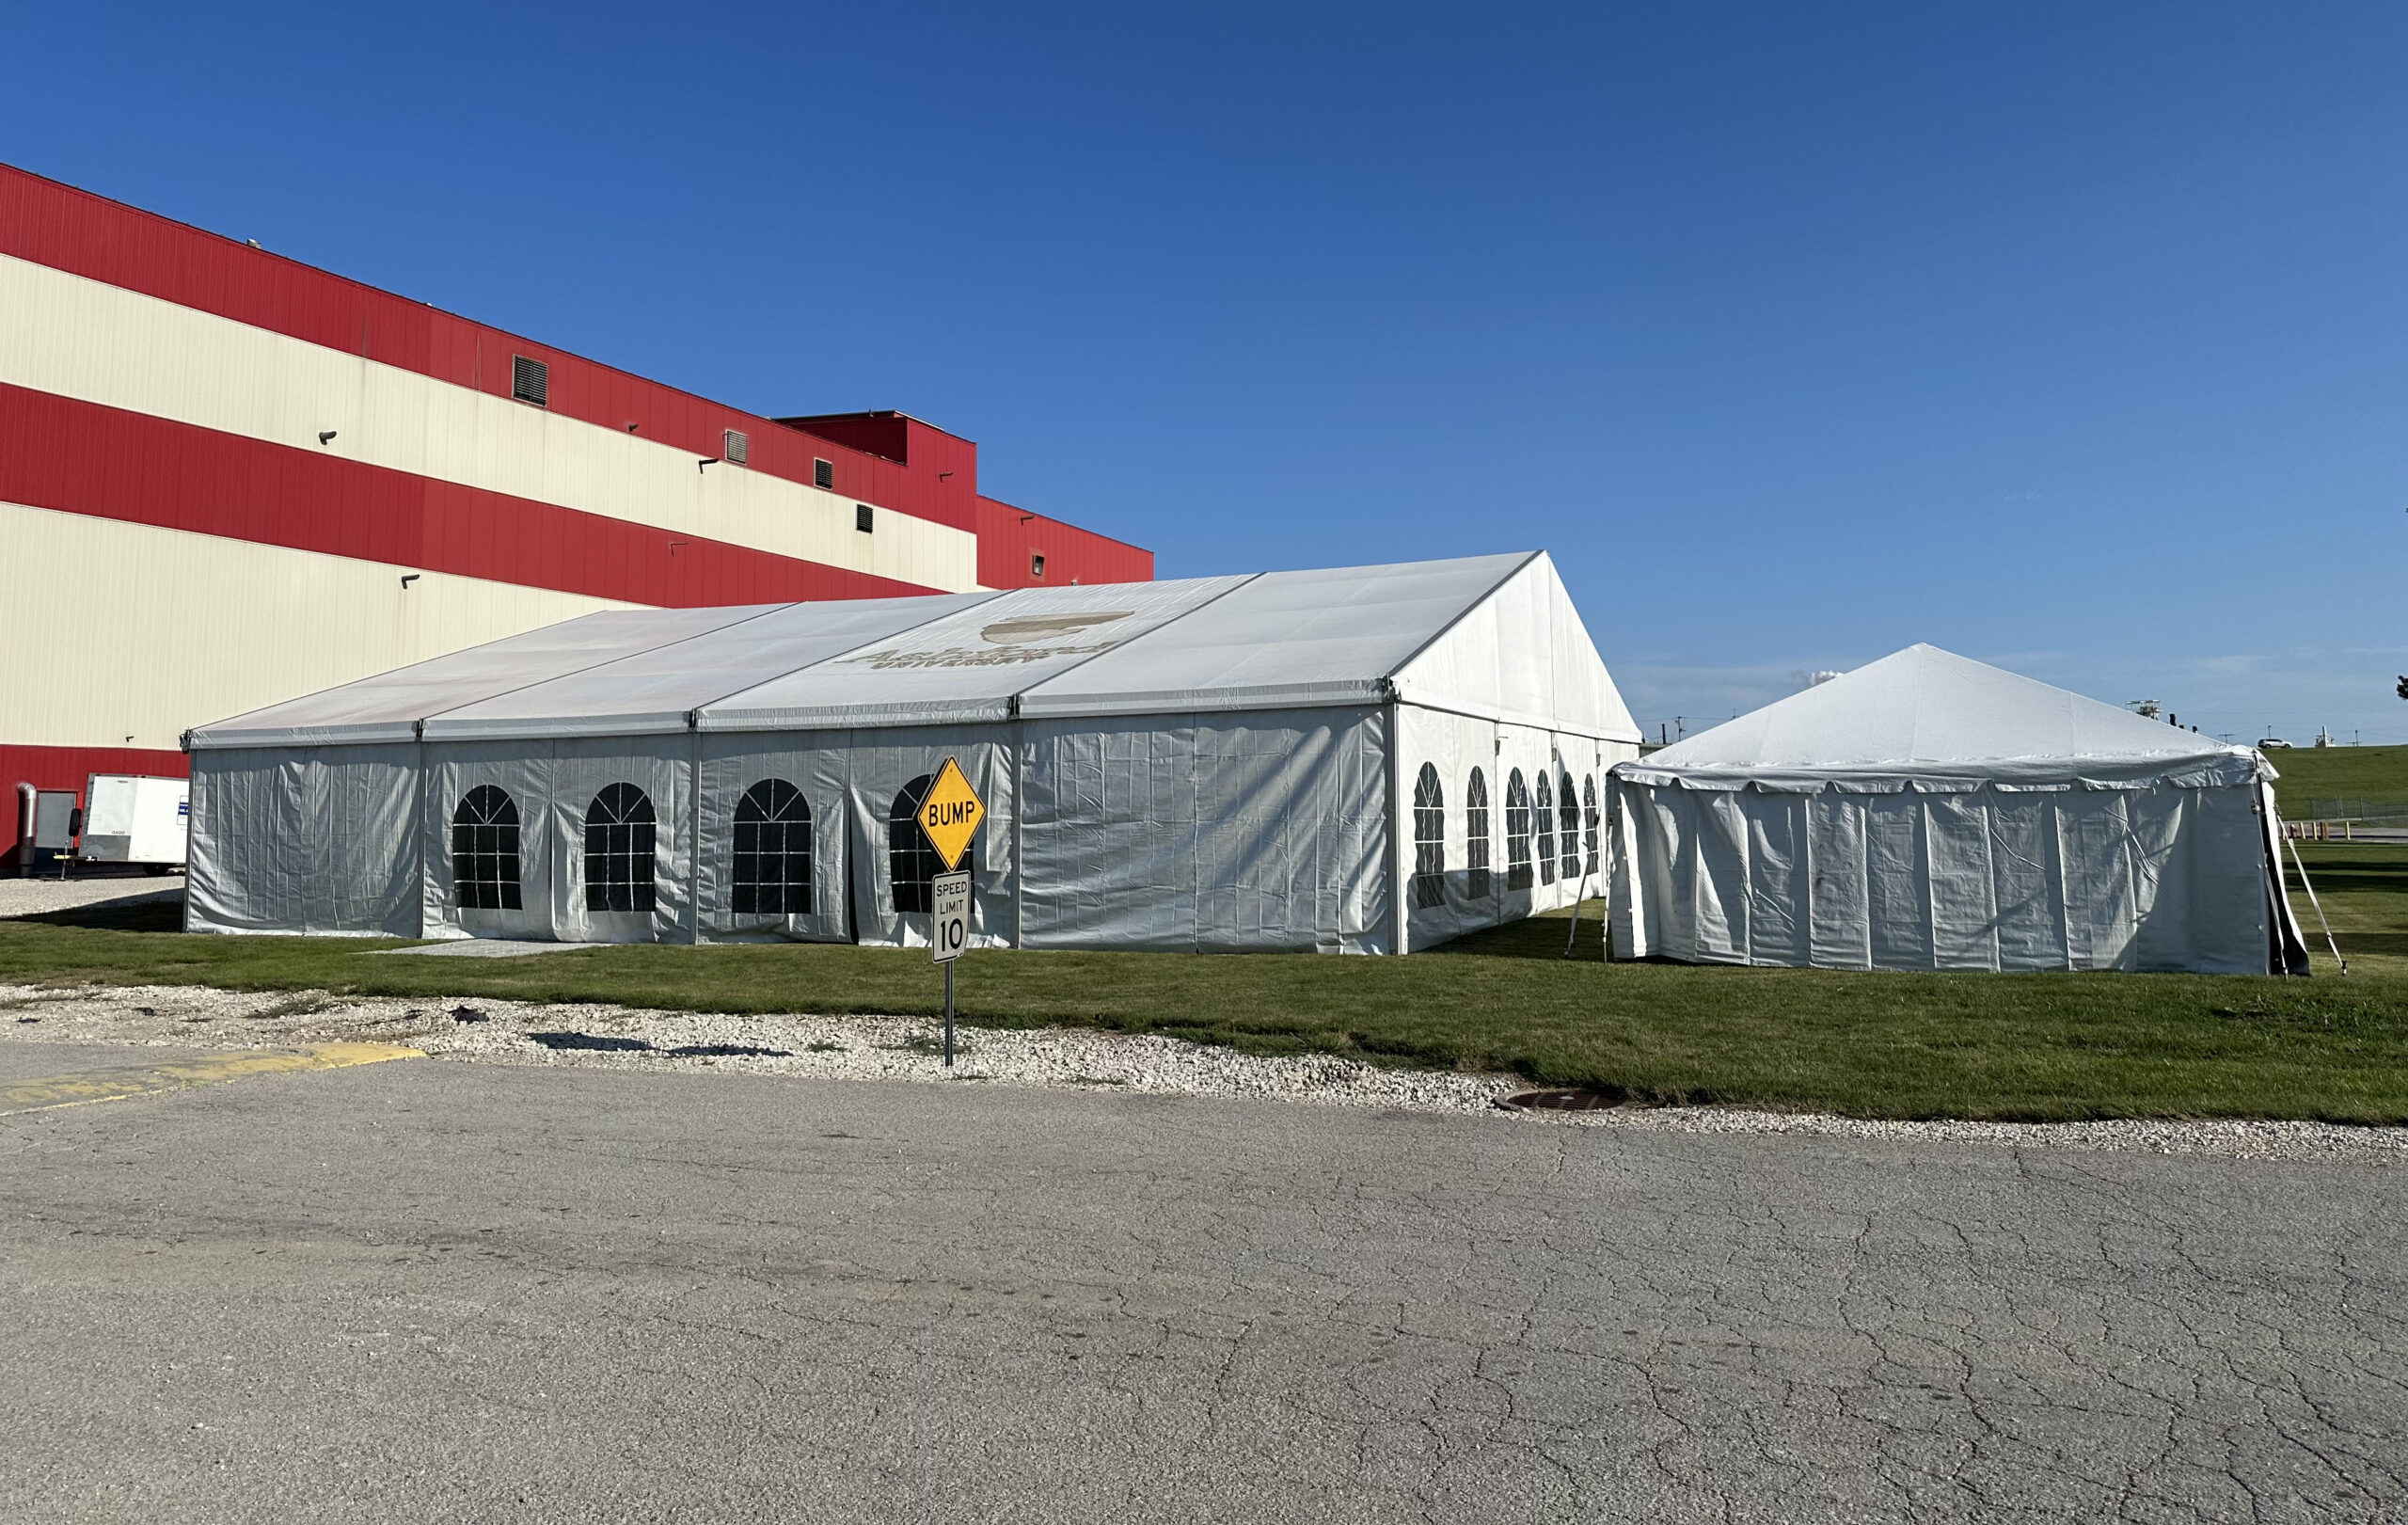 Outside of the 60′ x 66′ (18m x 20m) Losberger Clearspan Structure Temporary Tent on the left and 20' x 20' frame tent on the right (full)